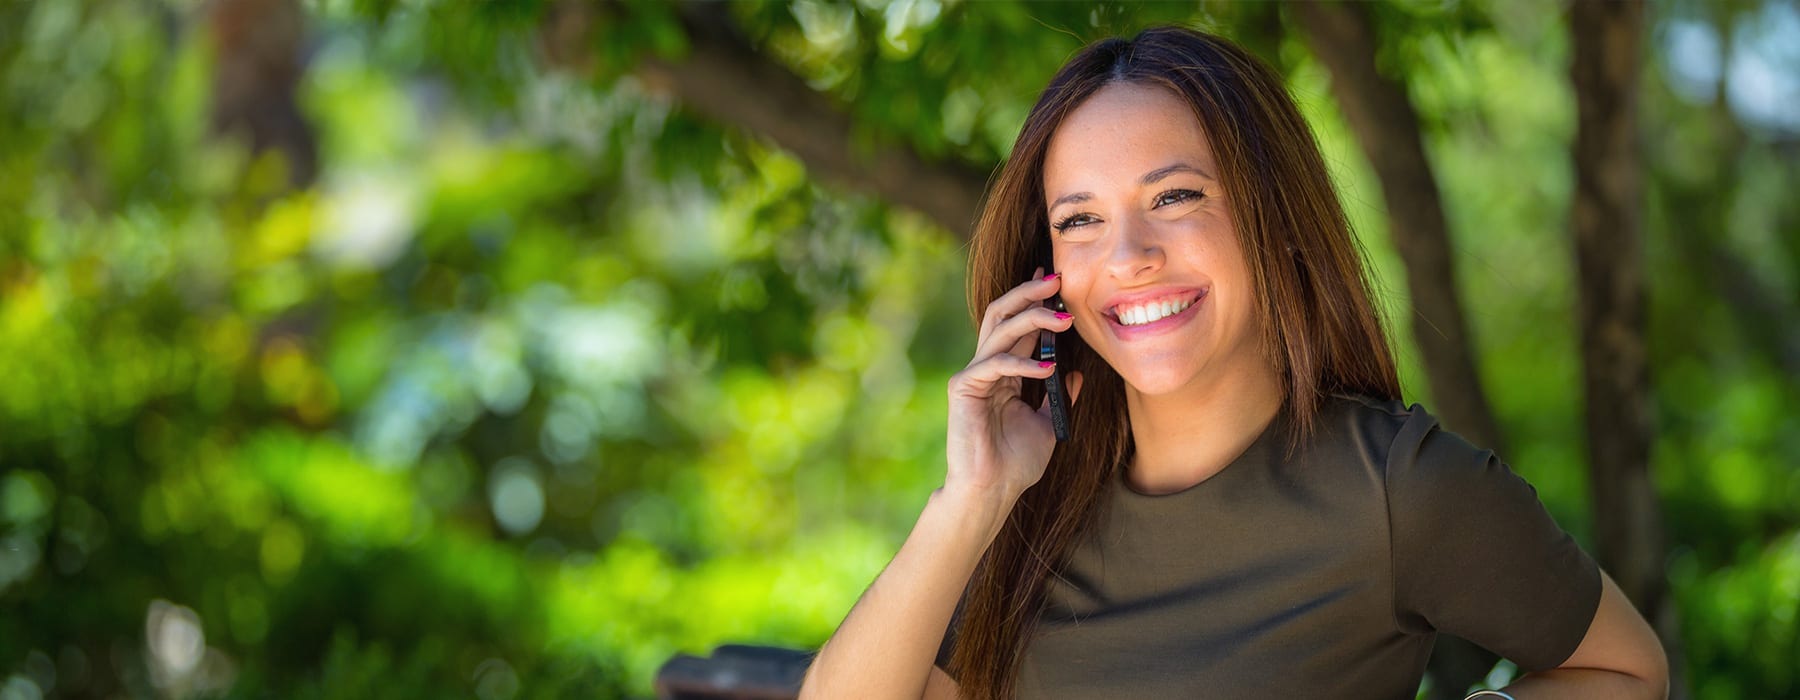 lifestyle image of a woman smiling while on the phone outdoors